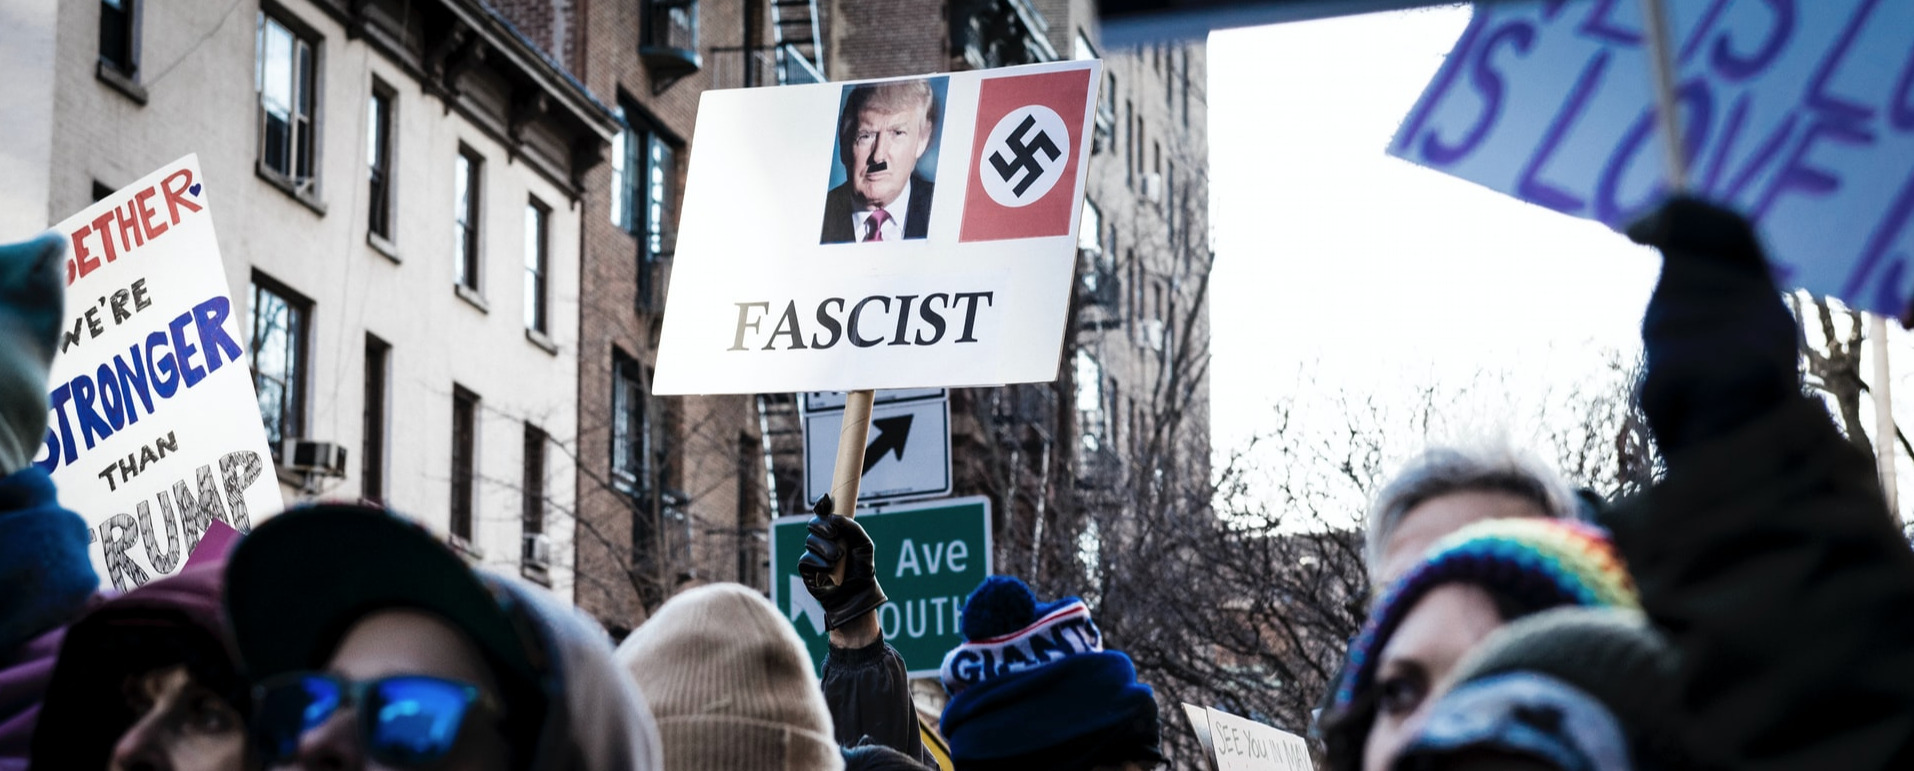 On Philanthropy, Fascism, and the 2016 Election